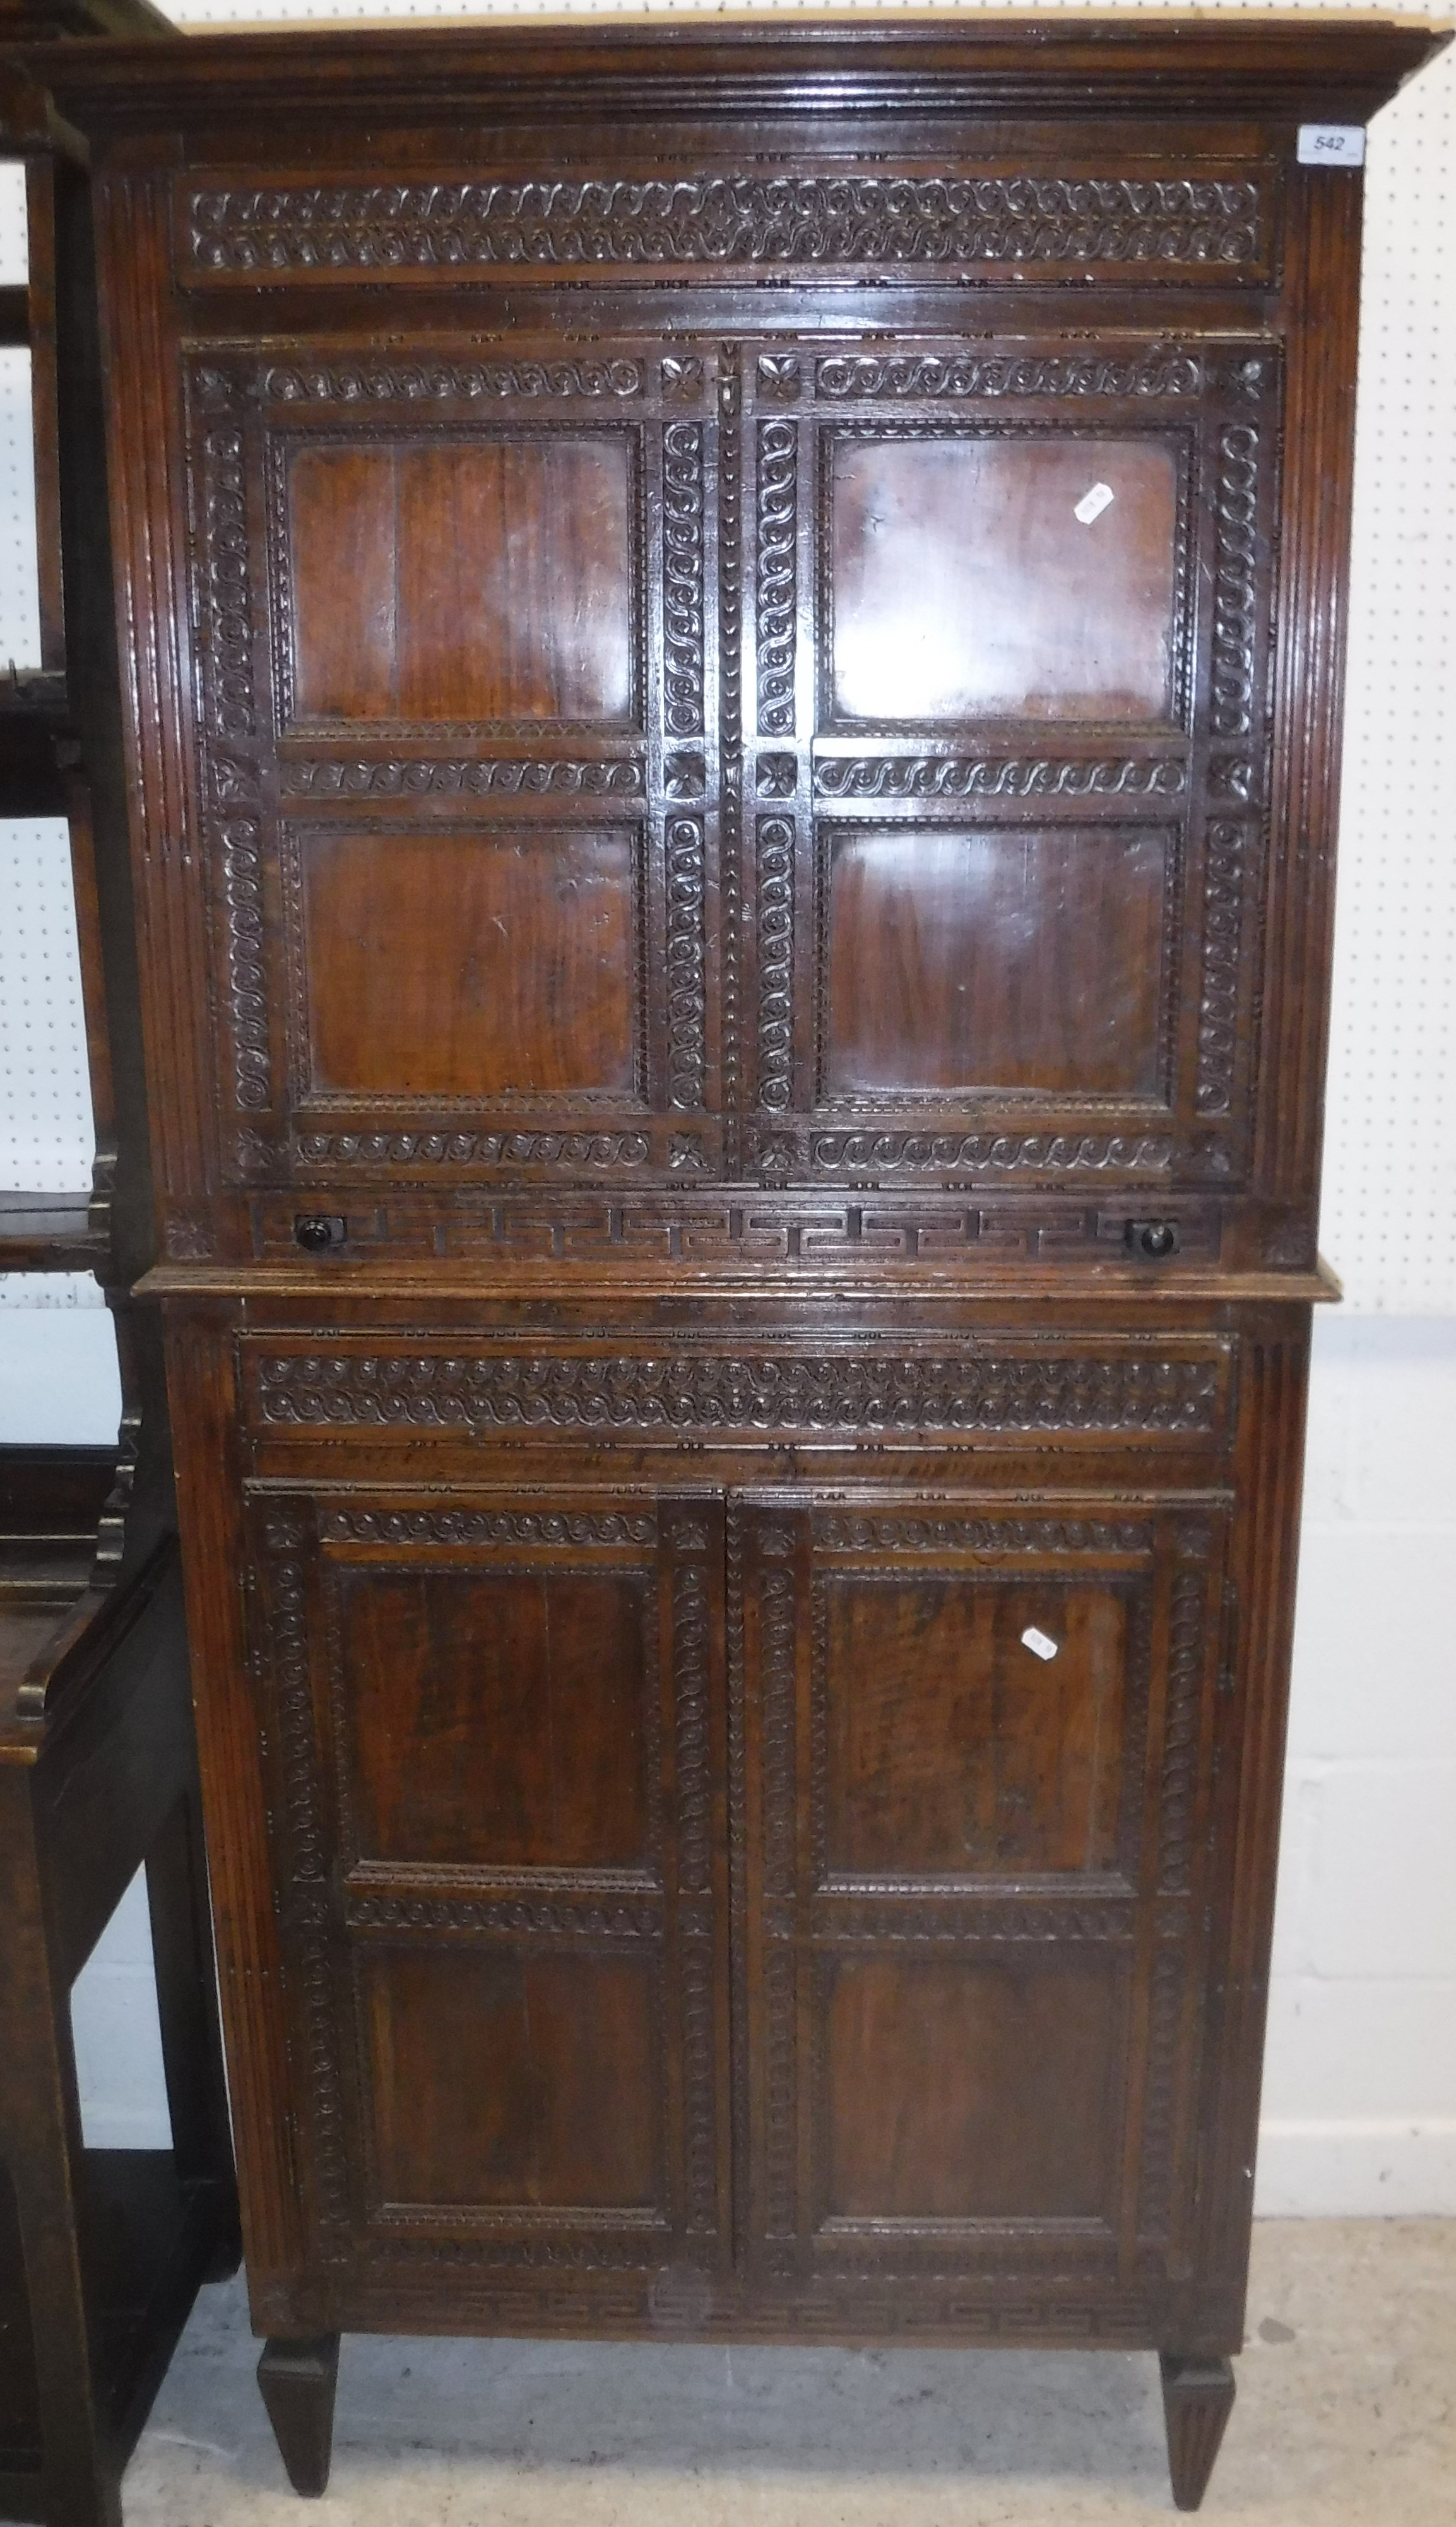 A 19th Century Anglo-Indian rosewood and carved secretaire abattant in the 17th Century taste with - Image 2 of 4